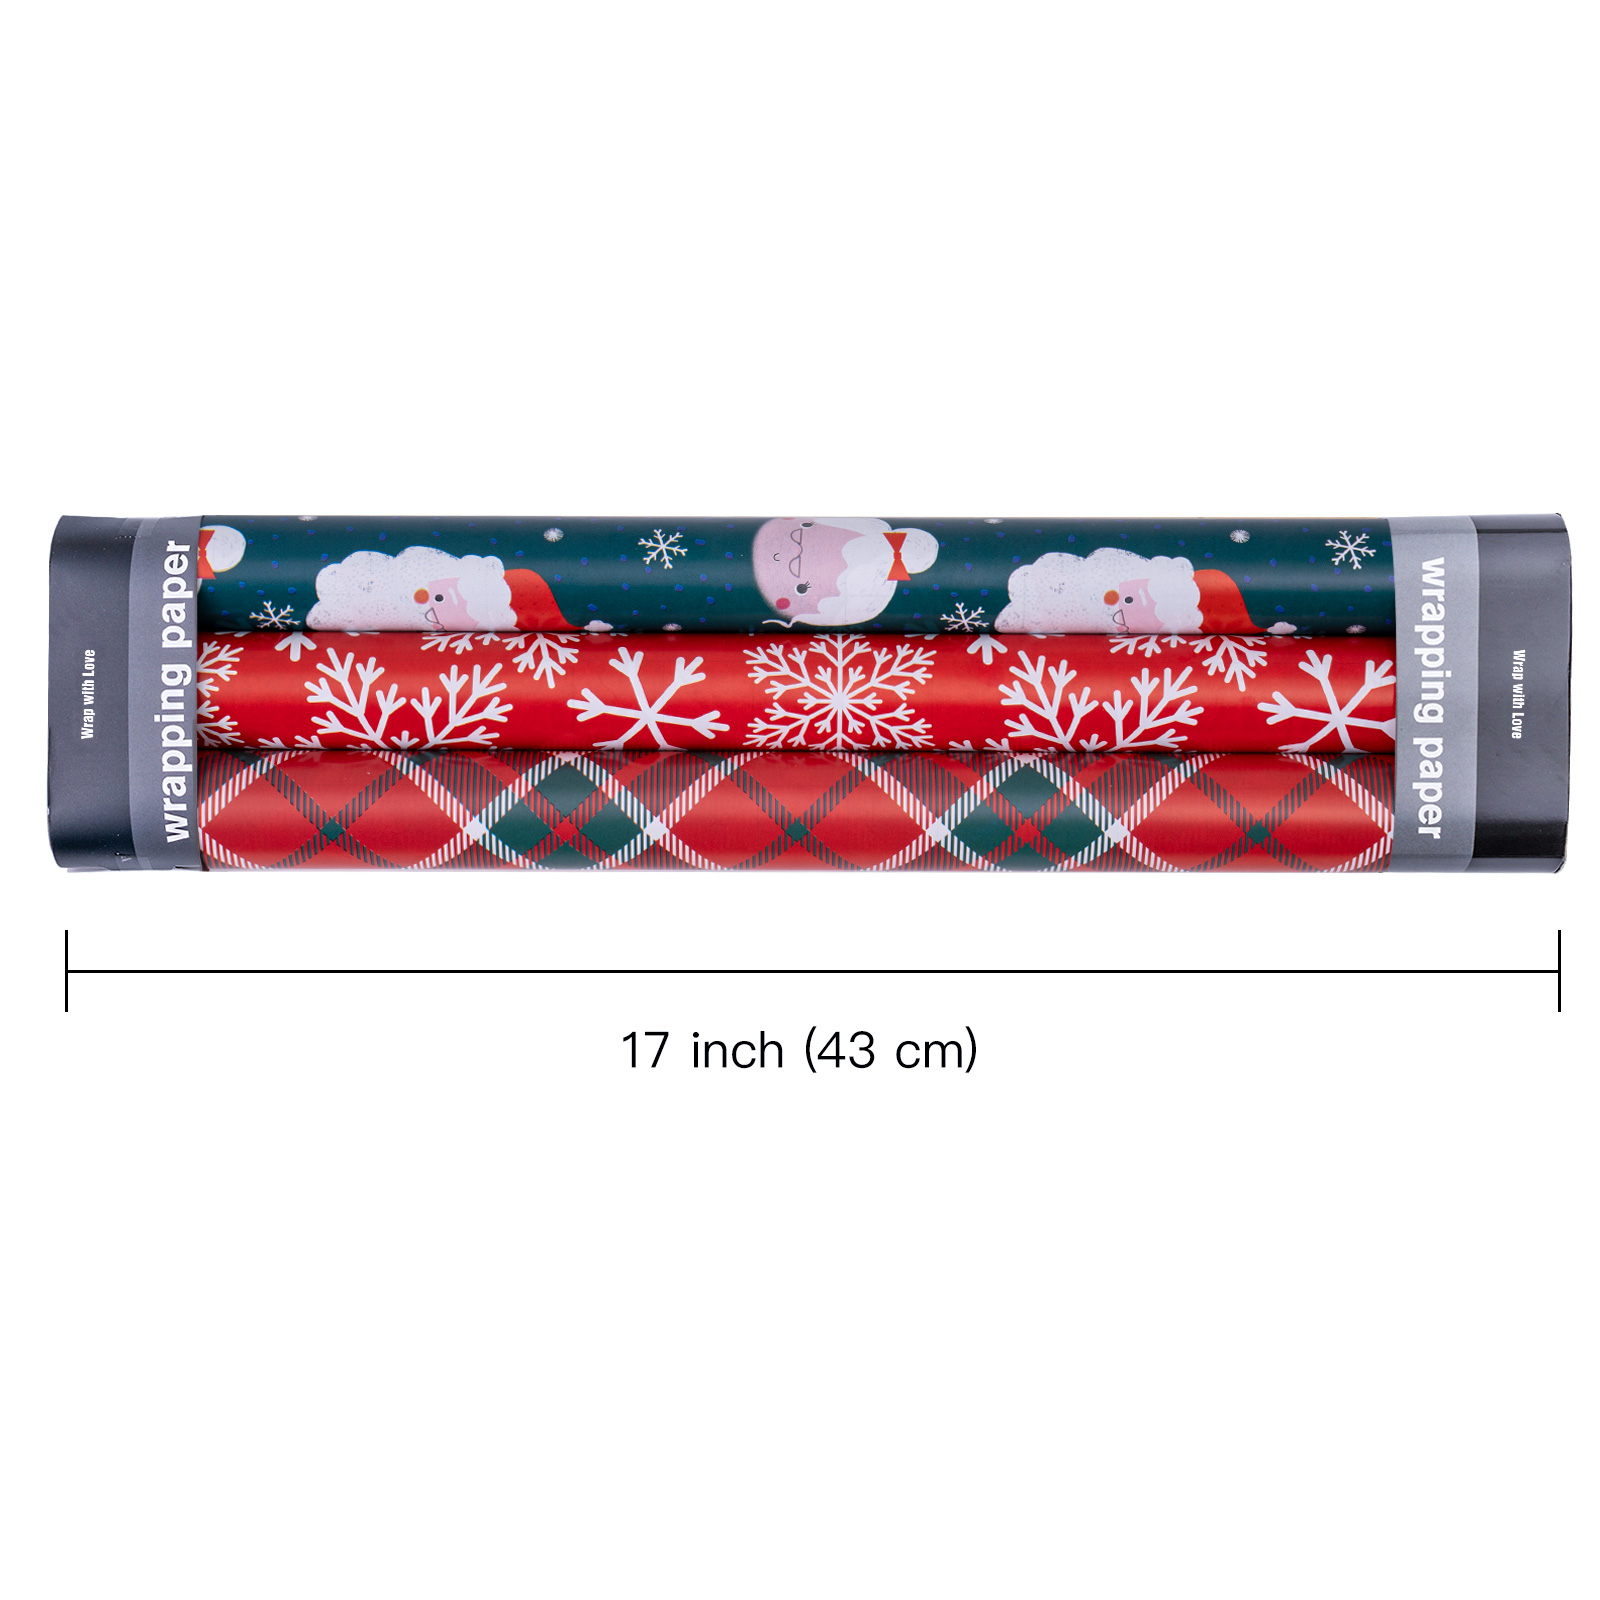 WRAPAHOLIC Christmas Wrapping Paper Roll - Mini Roll - 3 Rolls - 17 inch x 120 inch per Roll - Red and Green Santa Claus, Snowflake Holiday Collection